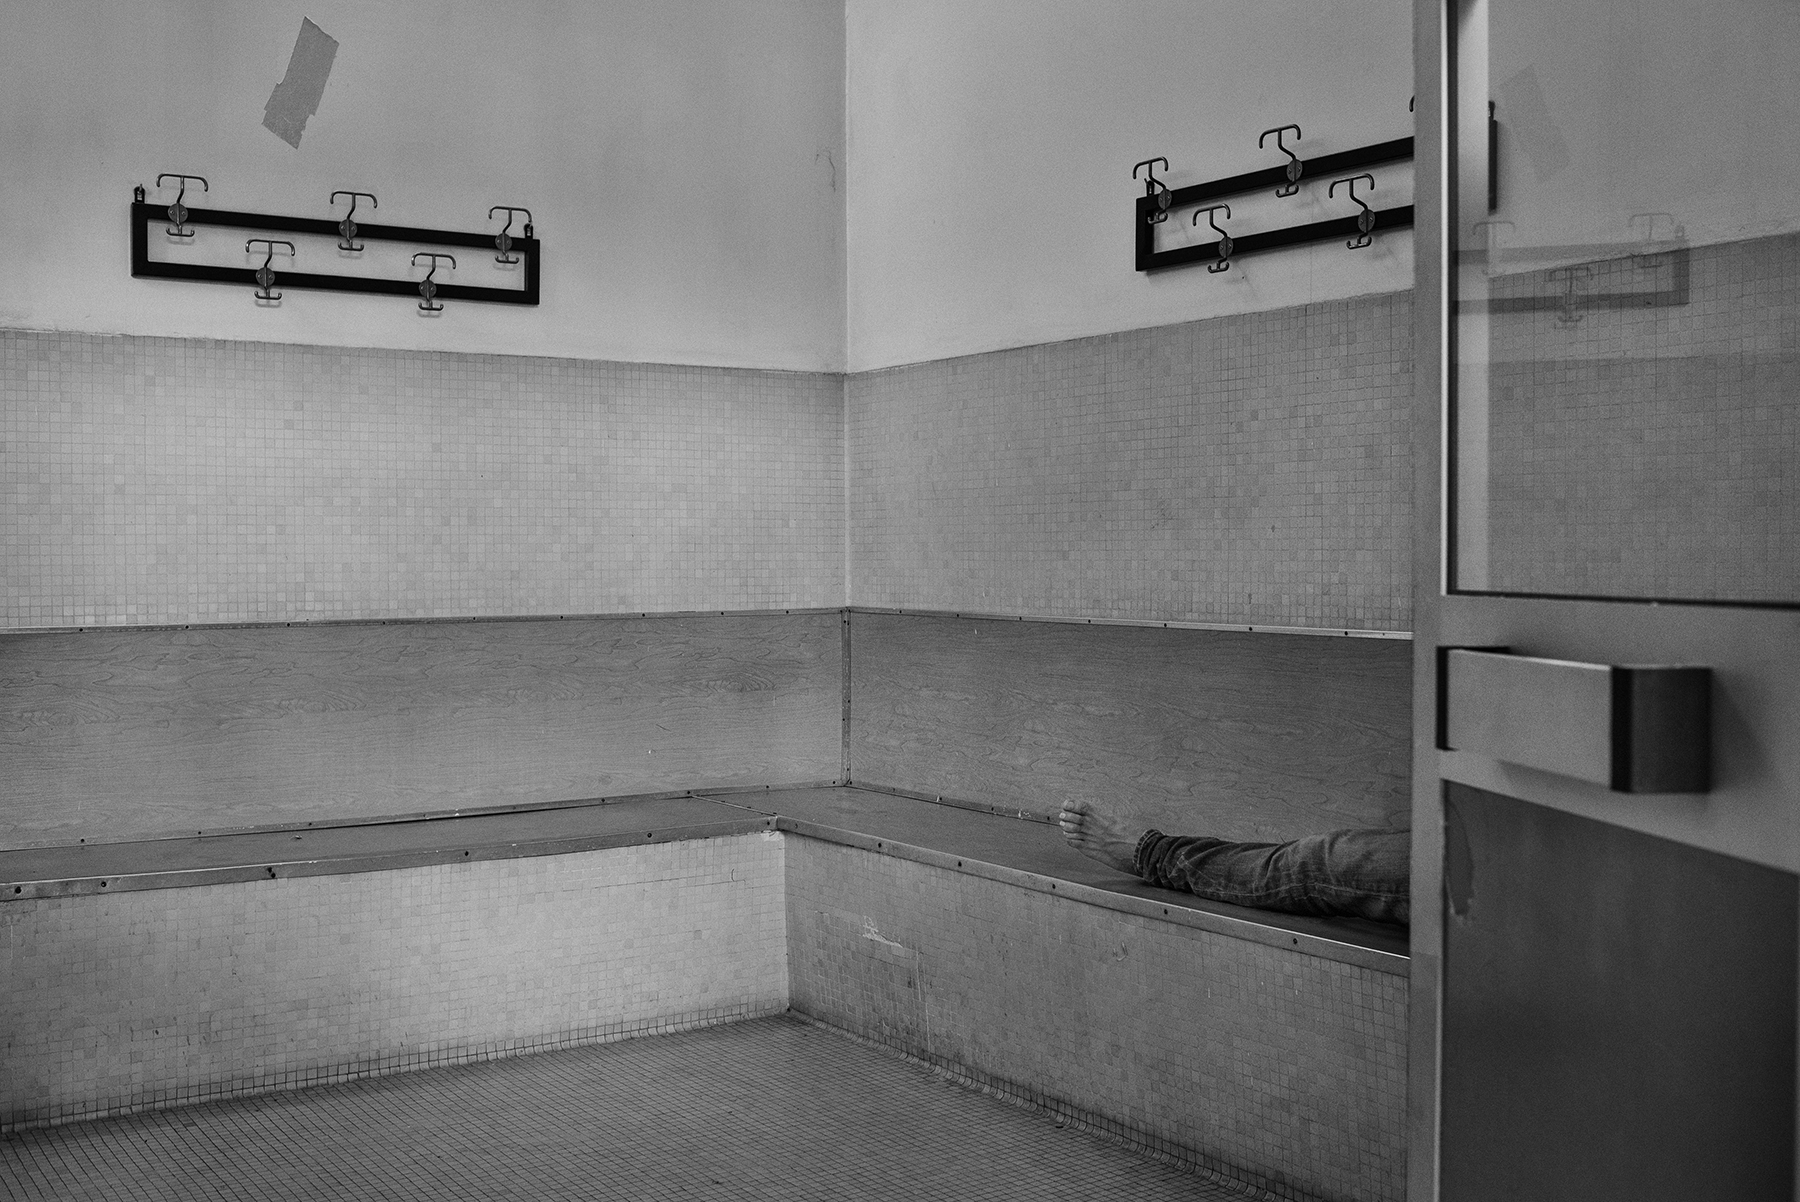  A public showers’ user rest at the entrance of the Public Baths of Via Bianzé in Turin, Italy; December 2018.
The city of Turin still runs 4 communal baths - part of a much bigger series of 15 buildings erected between 1900 and 1960 - offering a bas